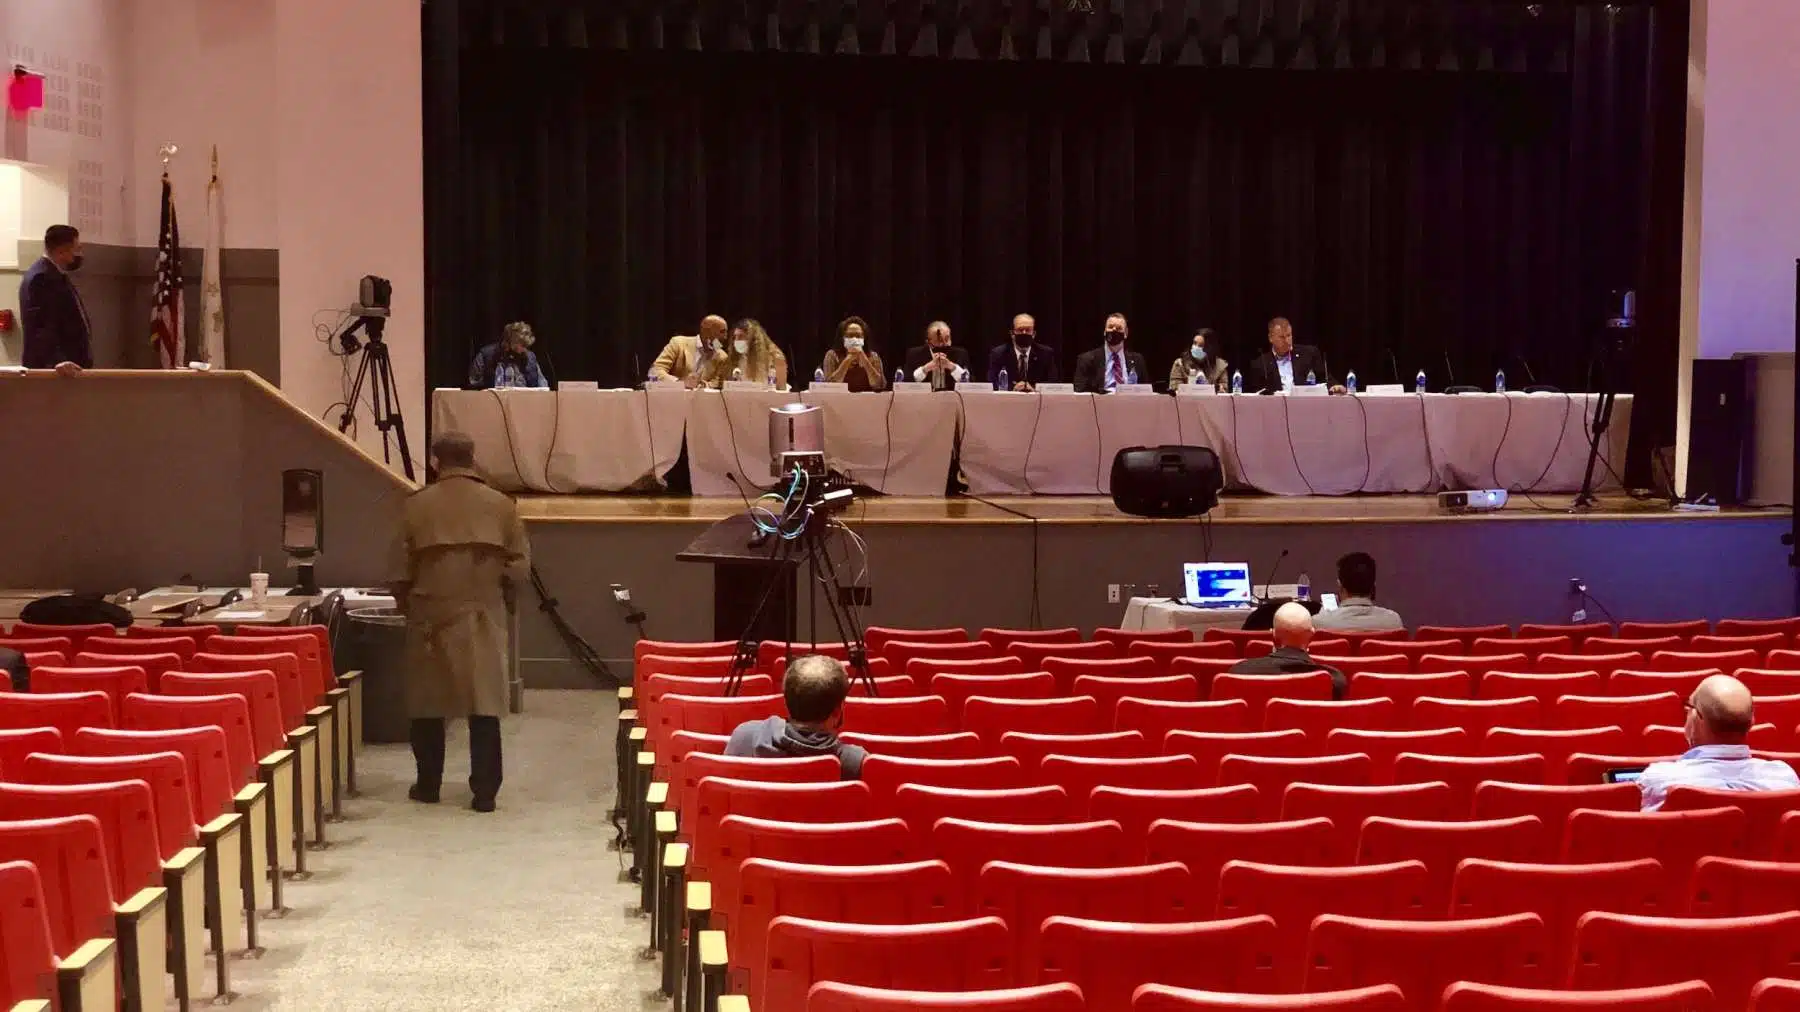 The RI Redistricting Commission hearing that wasn’t